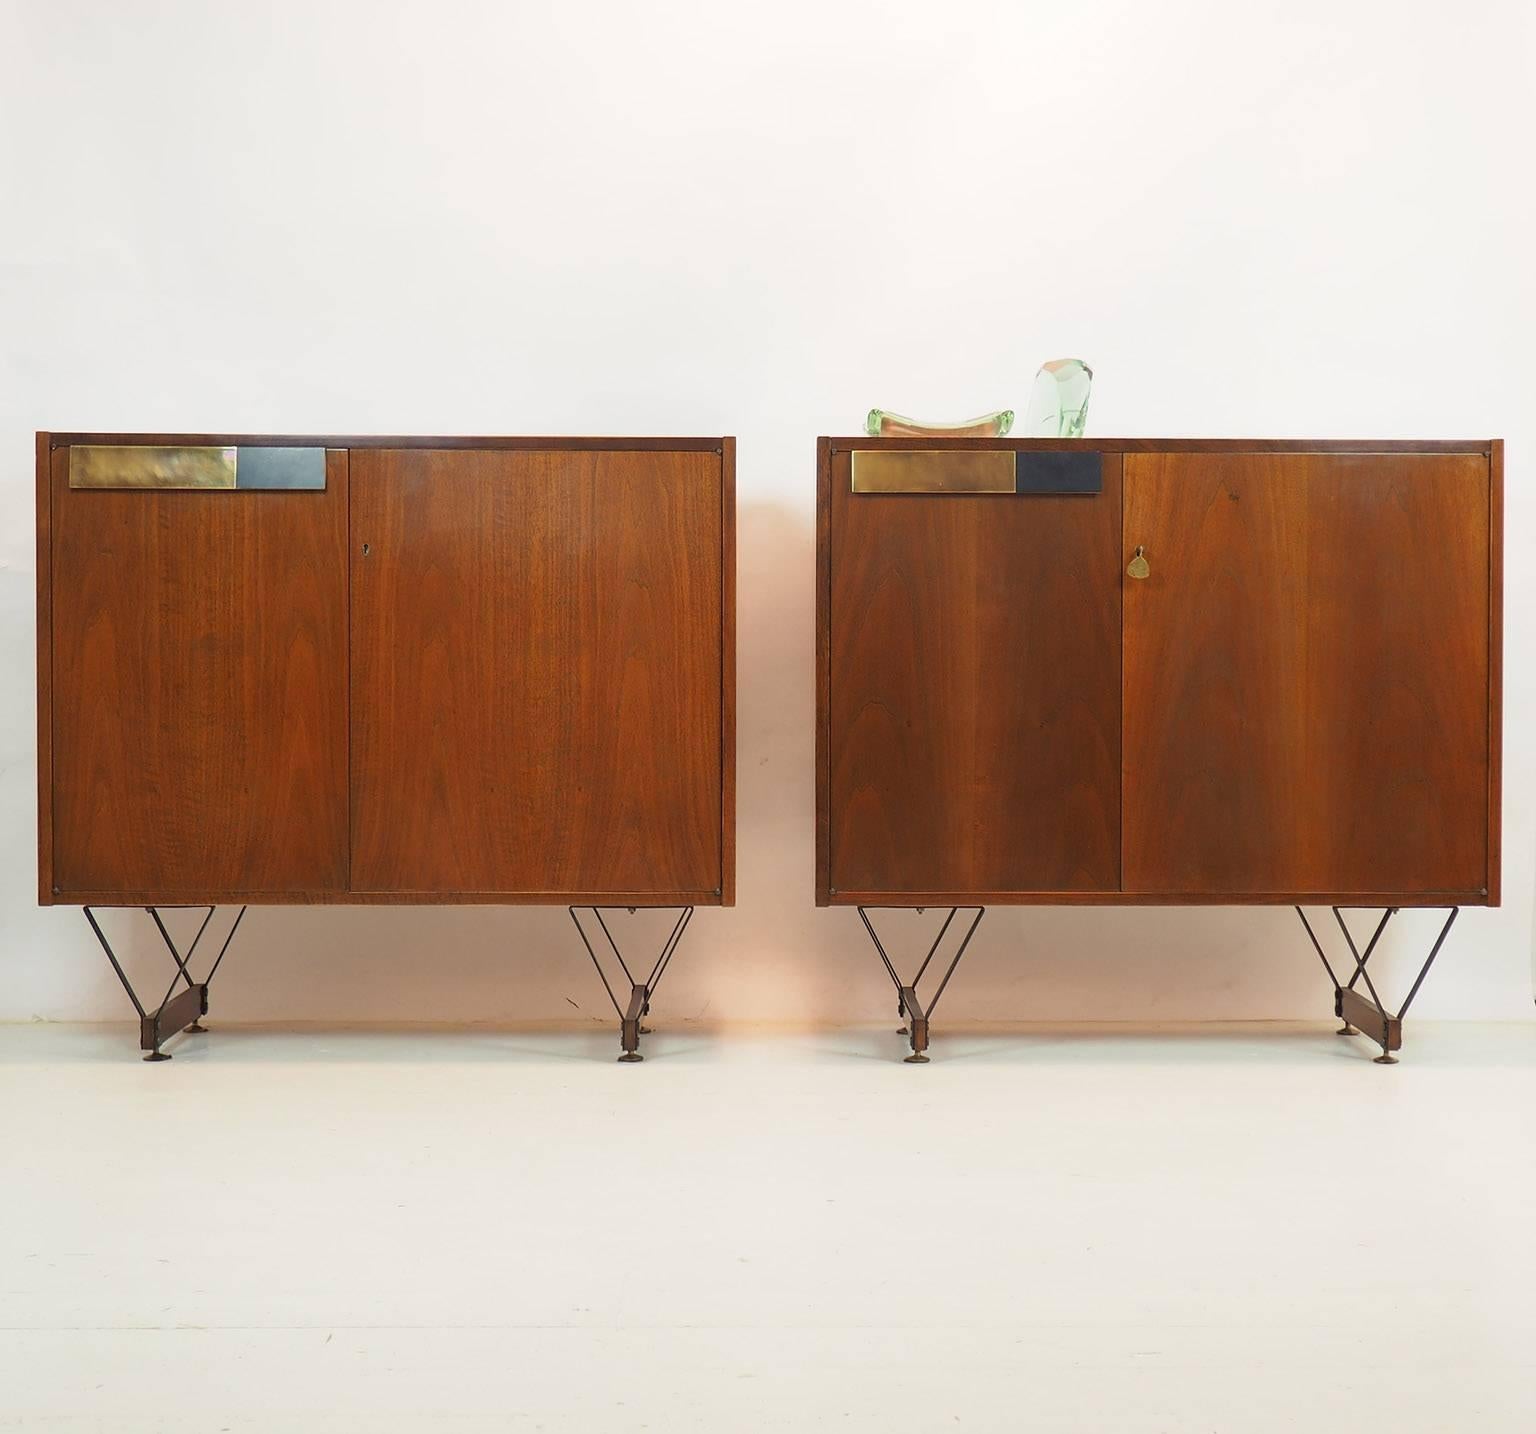 Fabulous and excellent pair of cabinets attributed to the skillful hand of the famous Italian designer Ico Parisi; designed between 1950s and 1960s.
The two front doors have an interesting asymmetrical design which give to the couple a special